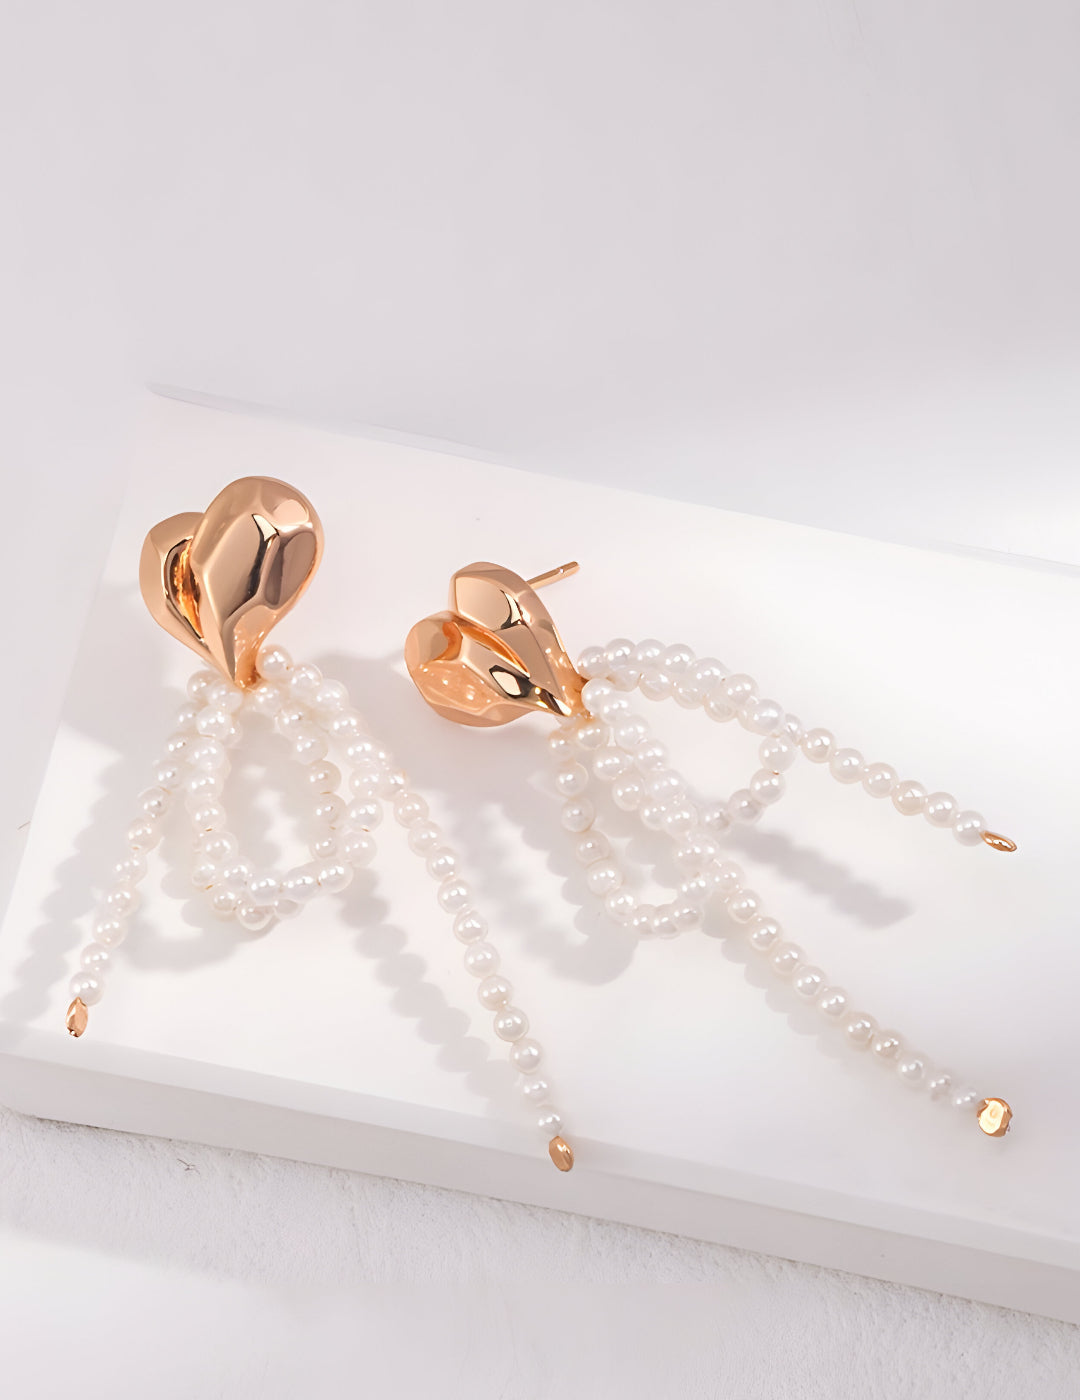 Allure of Pearl Luminance Earrings -  S925 Sterling Silver with 18K Gold Vermeil-  Lustrous and Lively Earrings